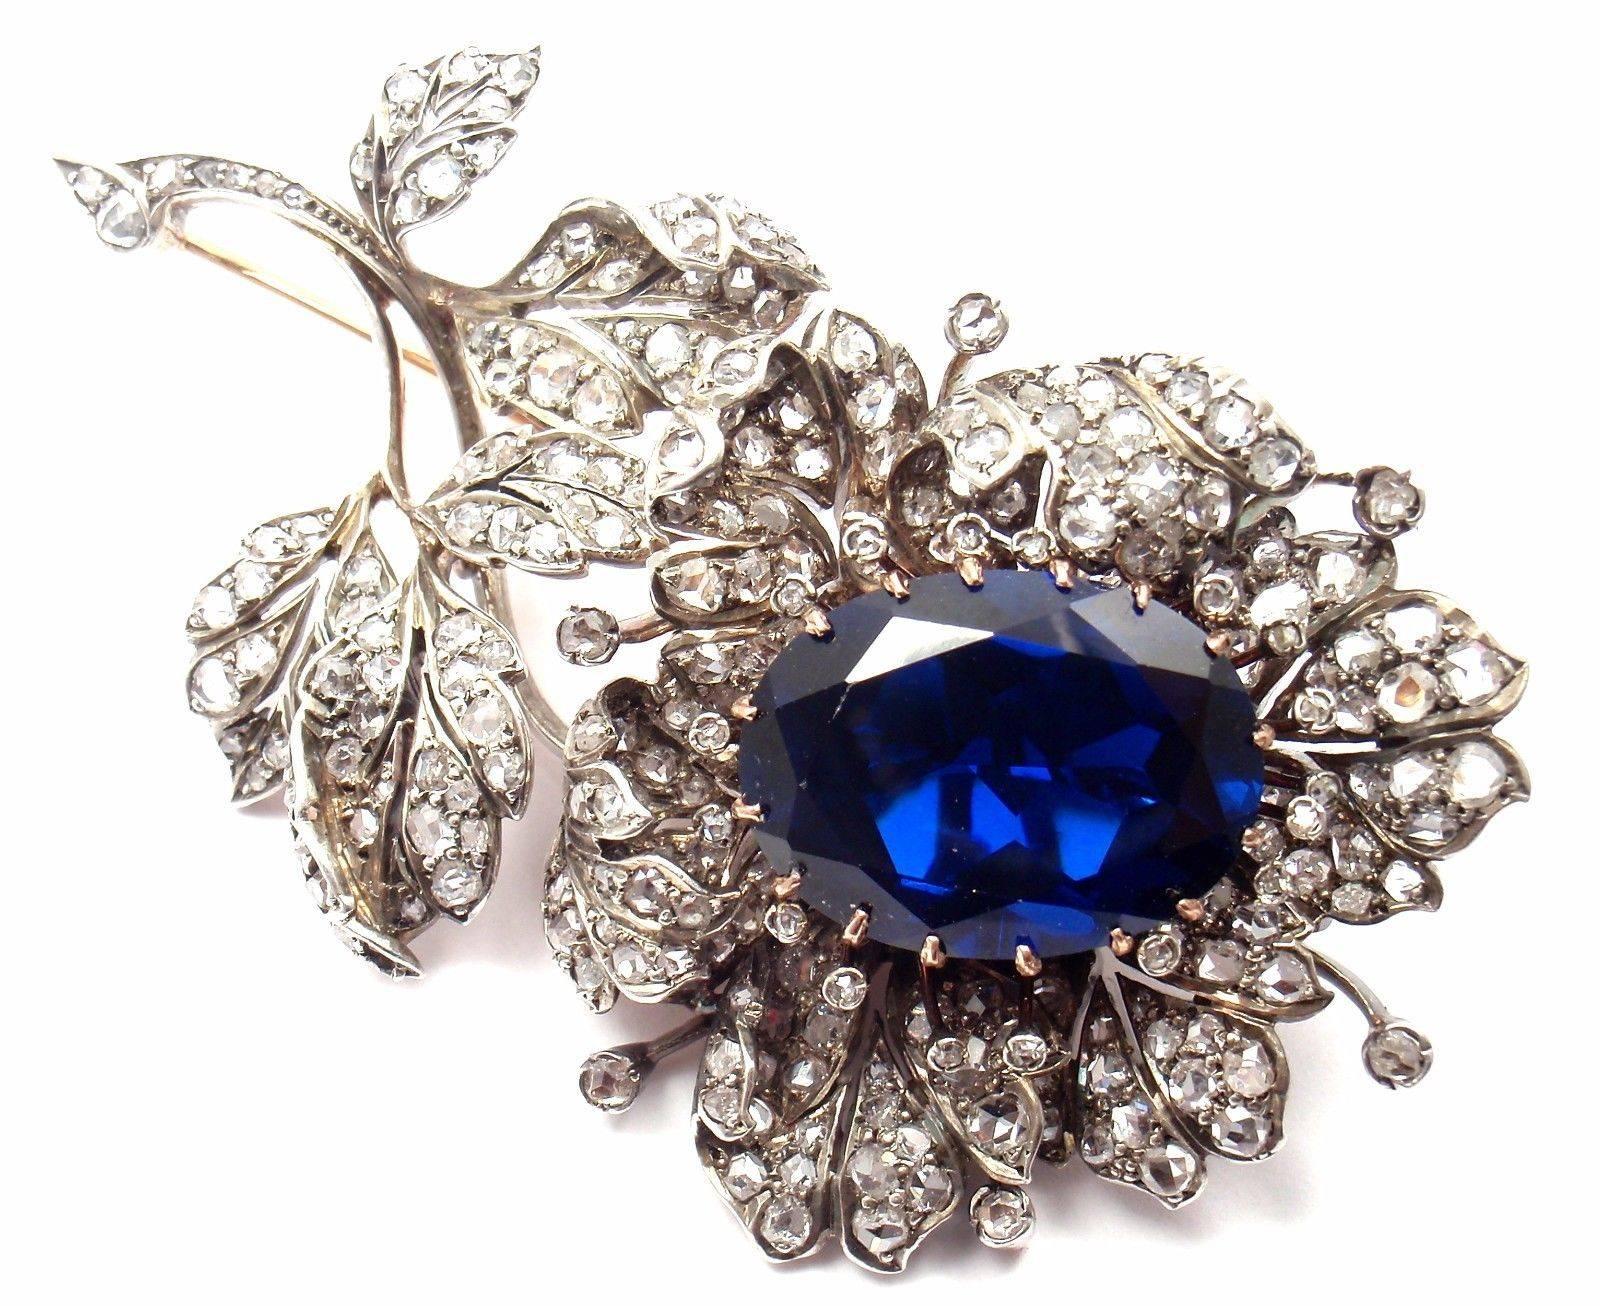 14k Rose Gold And Sterling Silver Antique Victorian Diamond Large Synthetic Sapphire Flower Pin Brooch.  
With 270 rose cut diamonds total weight approx. 7ct
Large synthetic sapphire 15mm x 20mm

Details:  
Measurements: 2 3/4" x 1